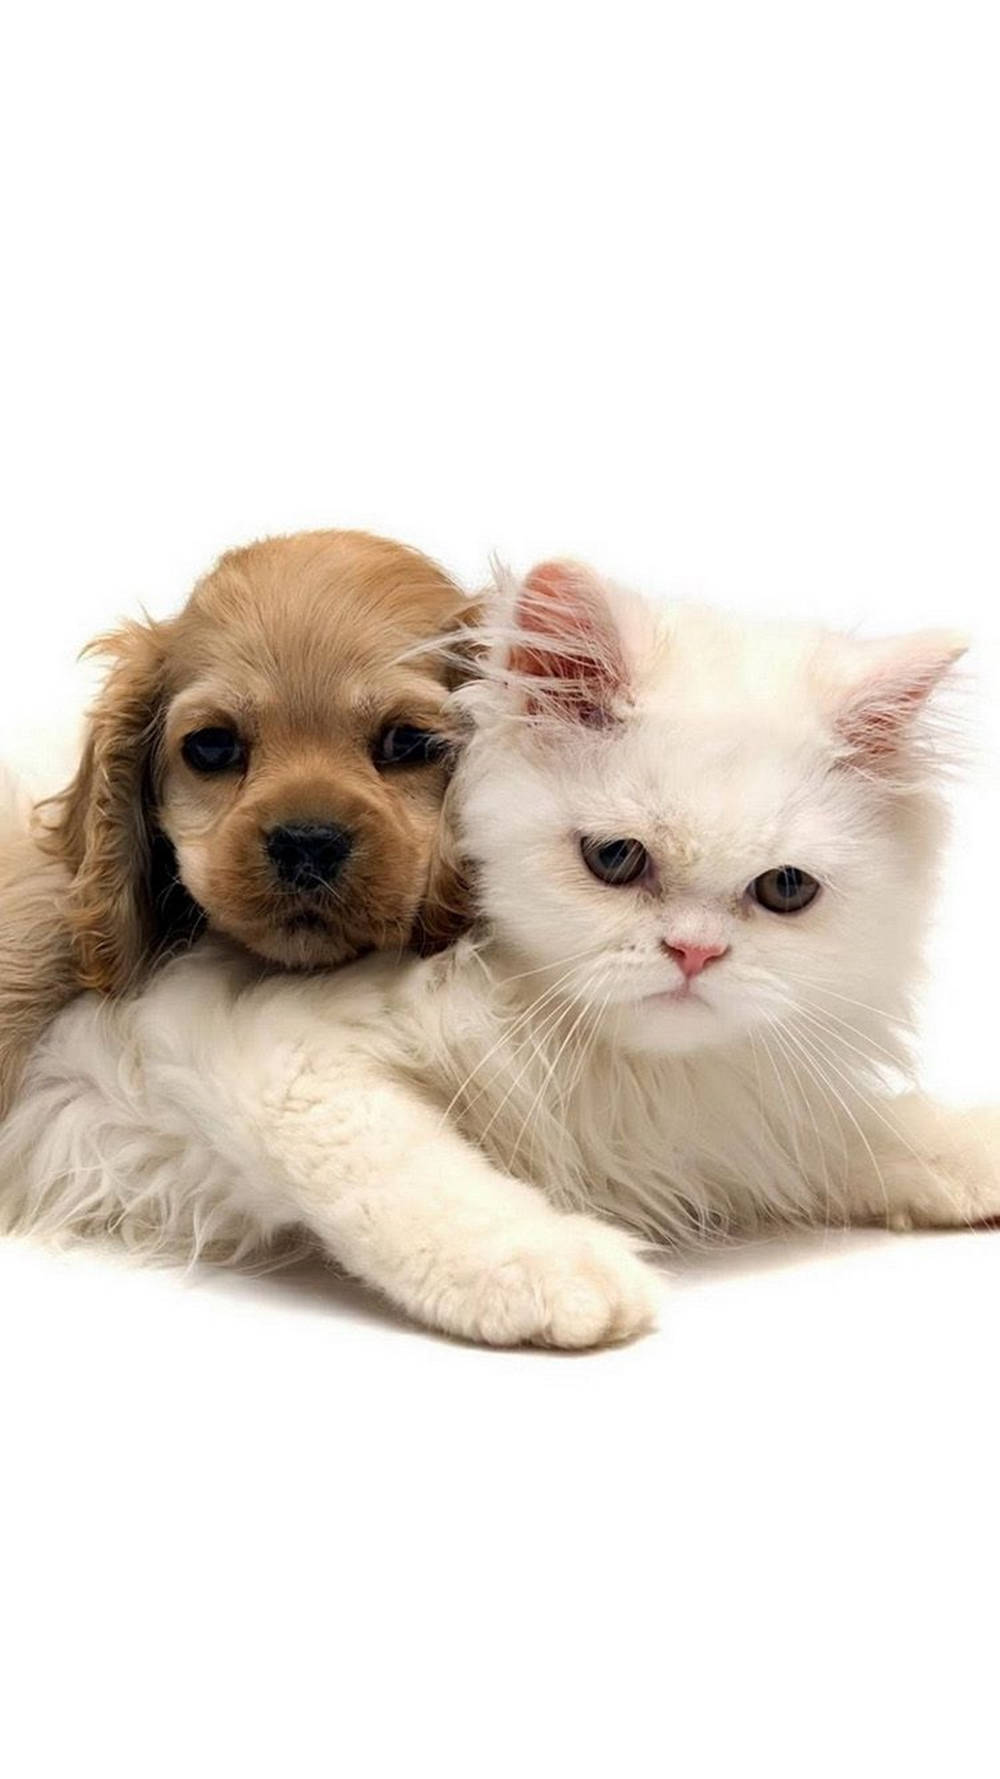 Sweet Spaniel Dog And Persian Cat Iphone